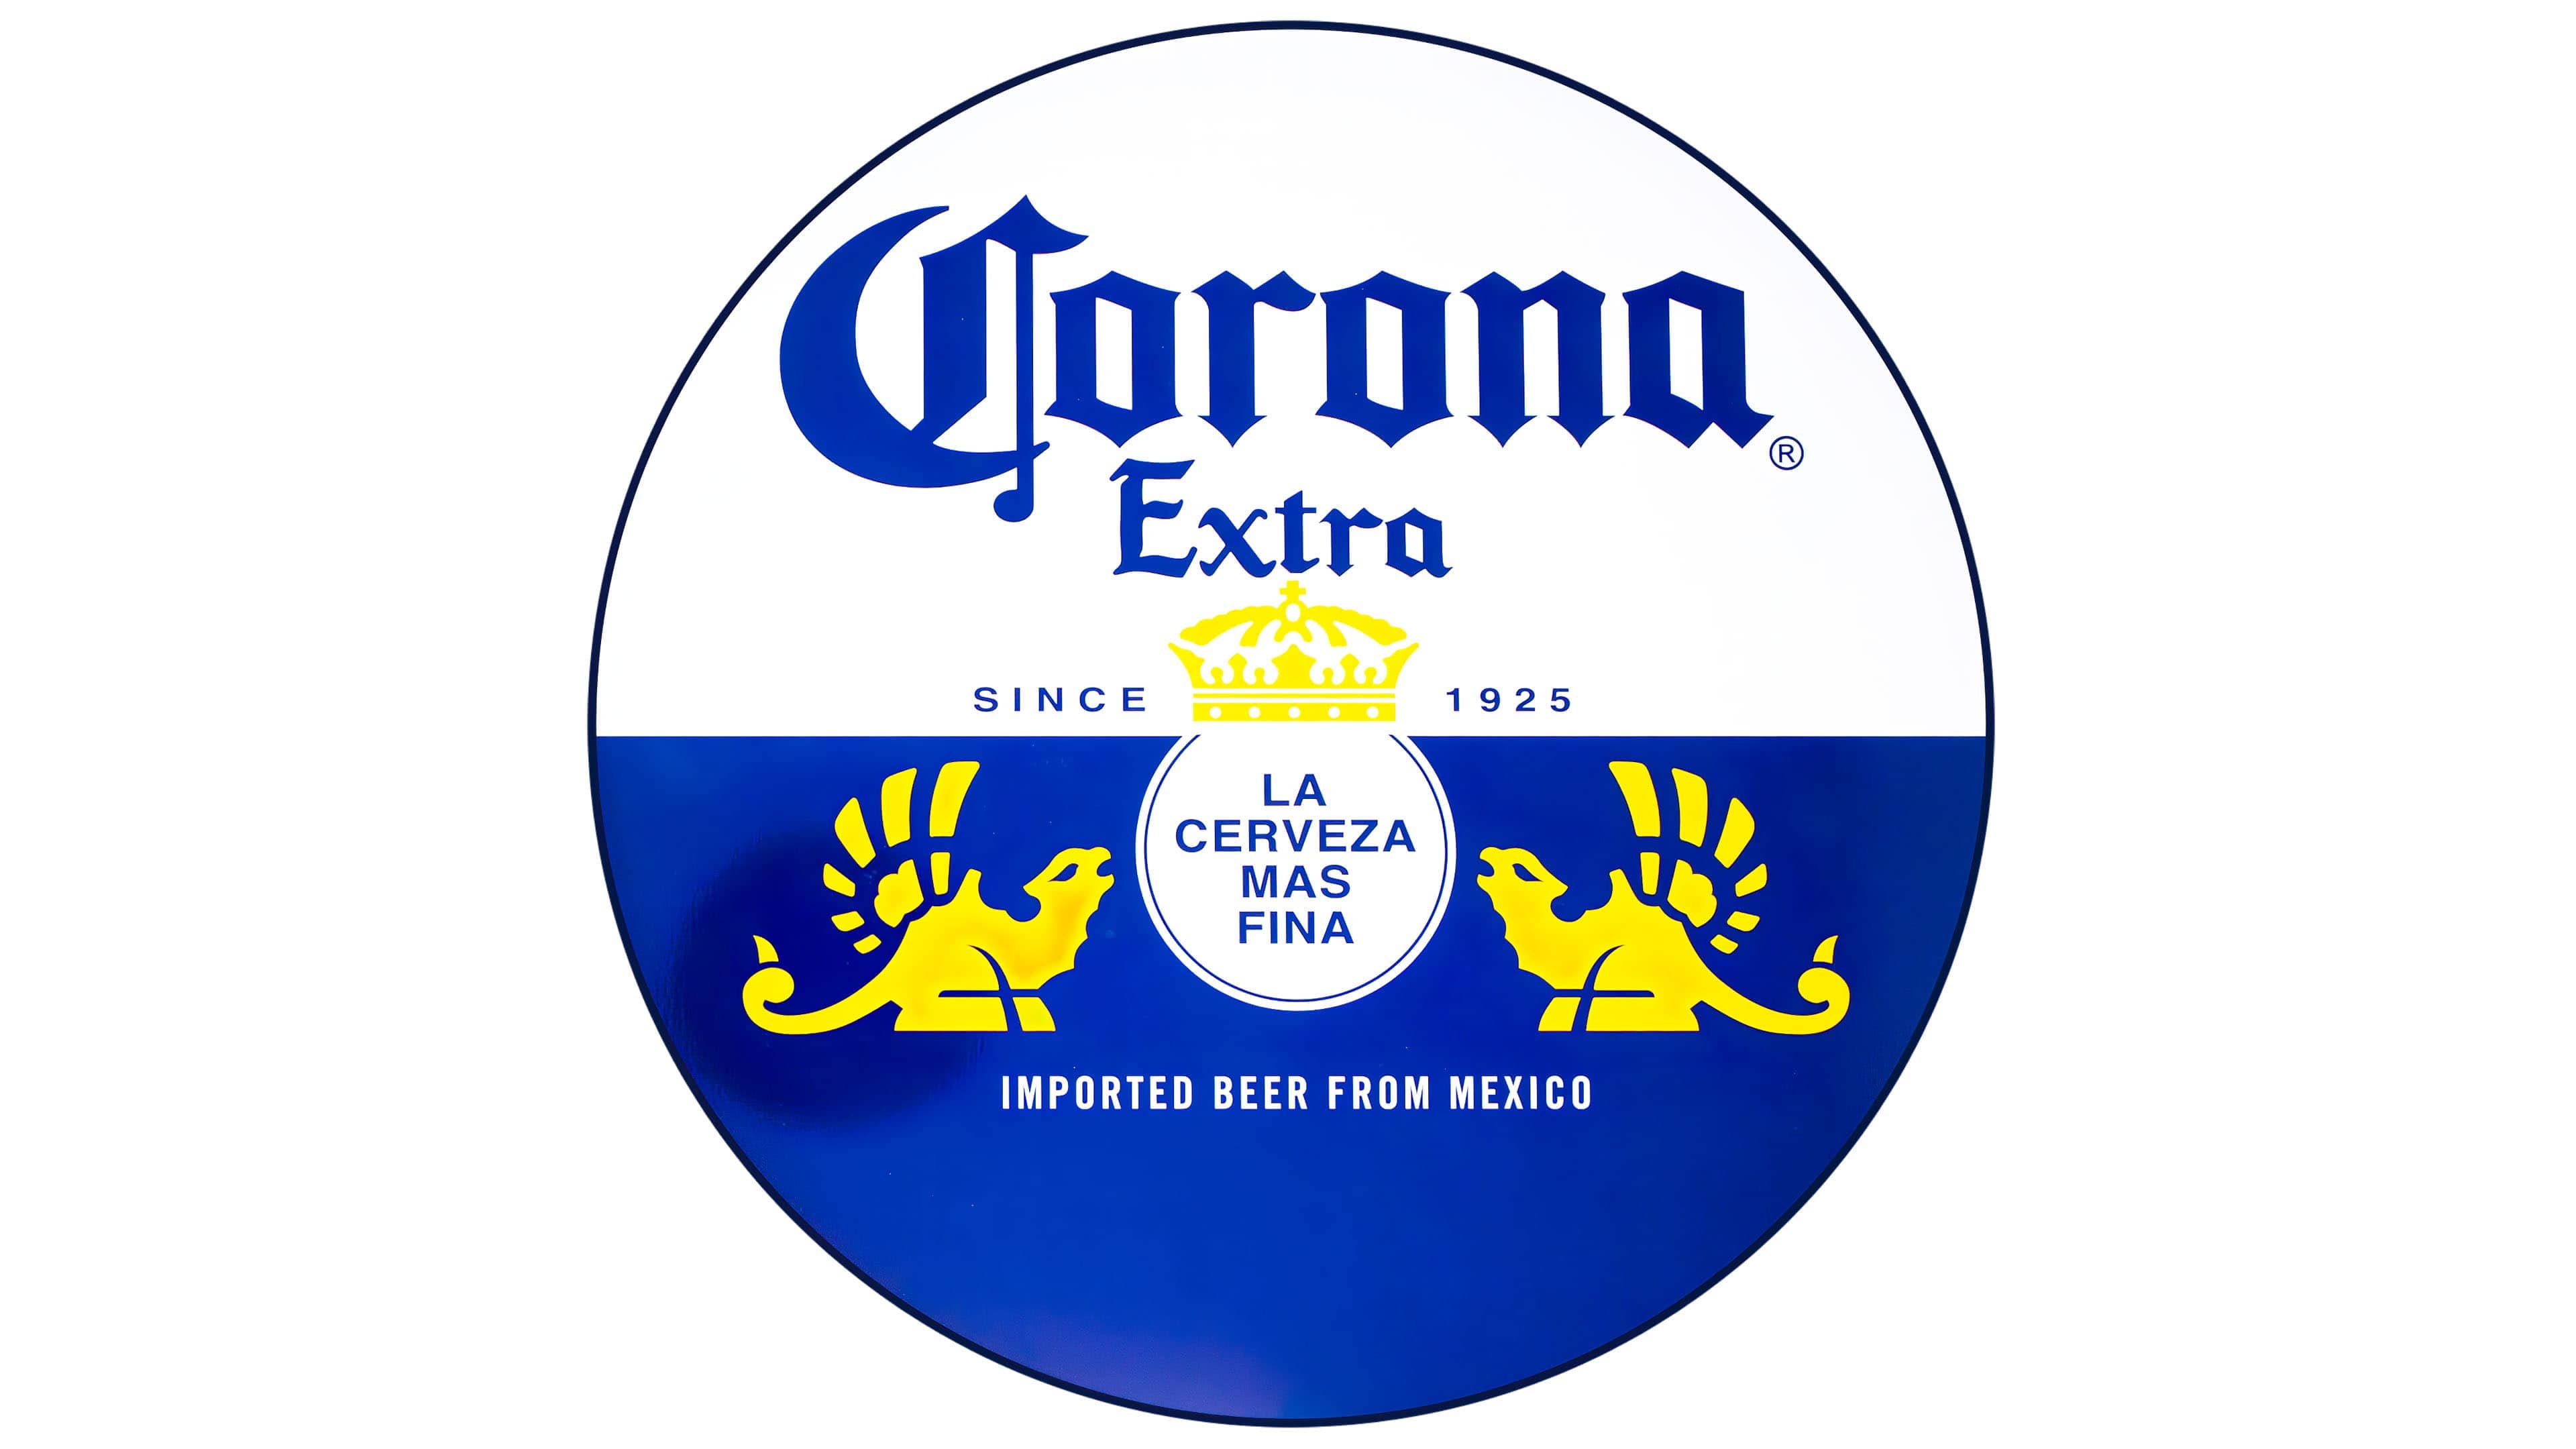 CORONA EXTRA BEER LOGO ON WHITE COLLECTOR MARBLE 